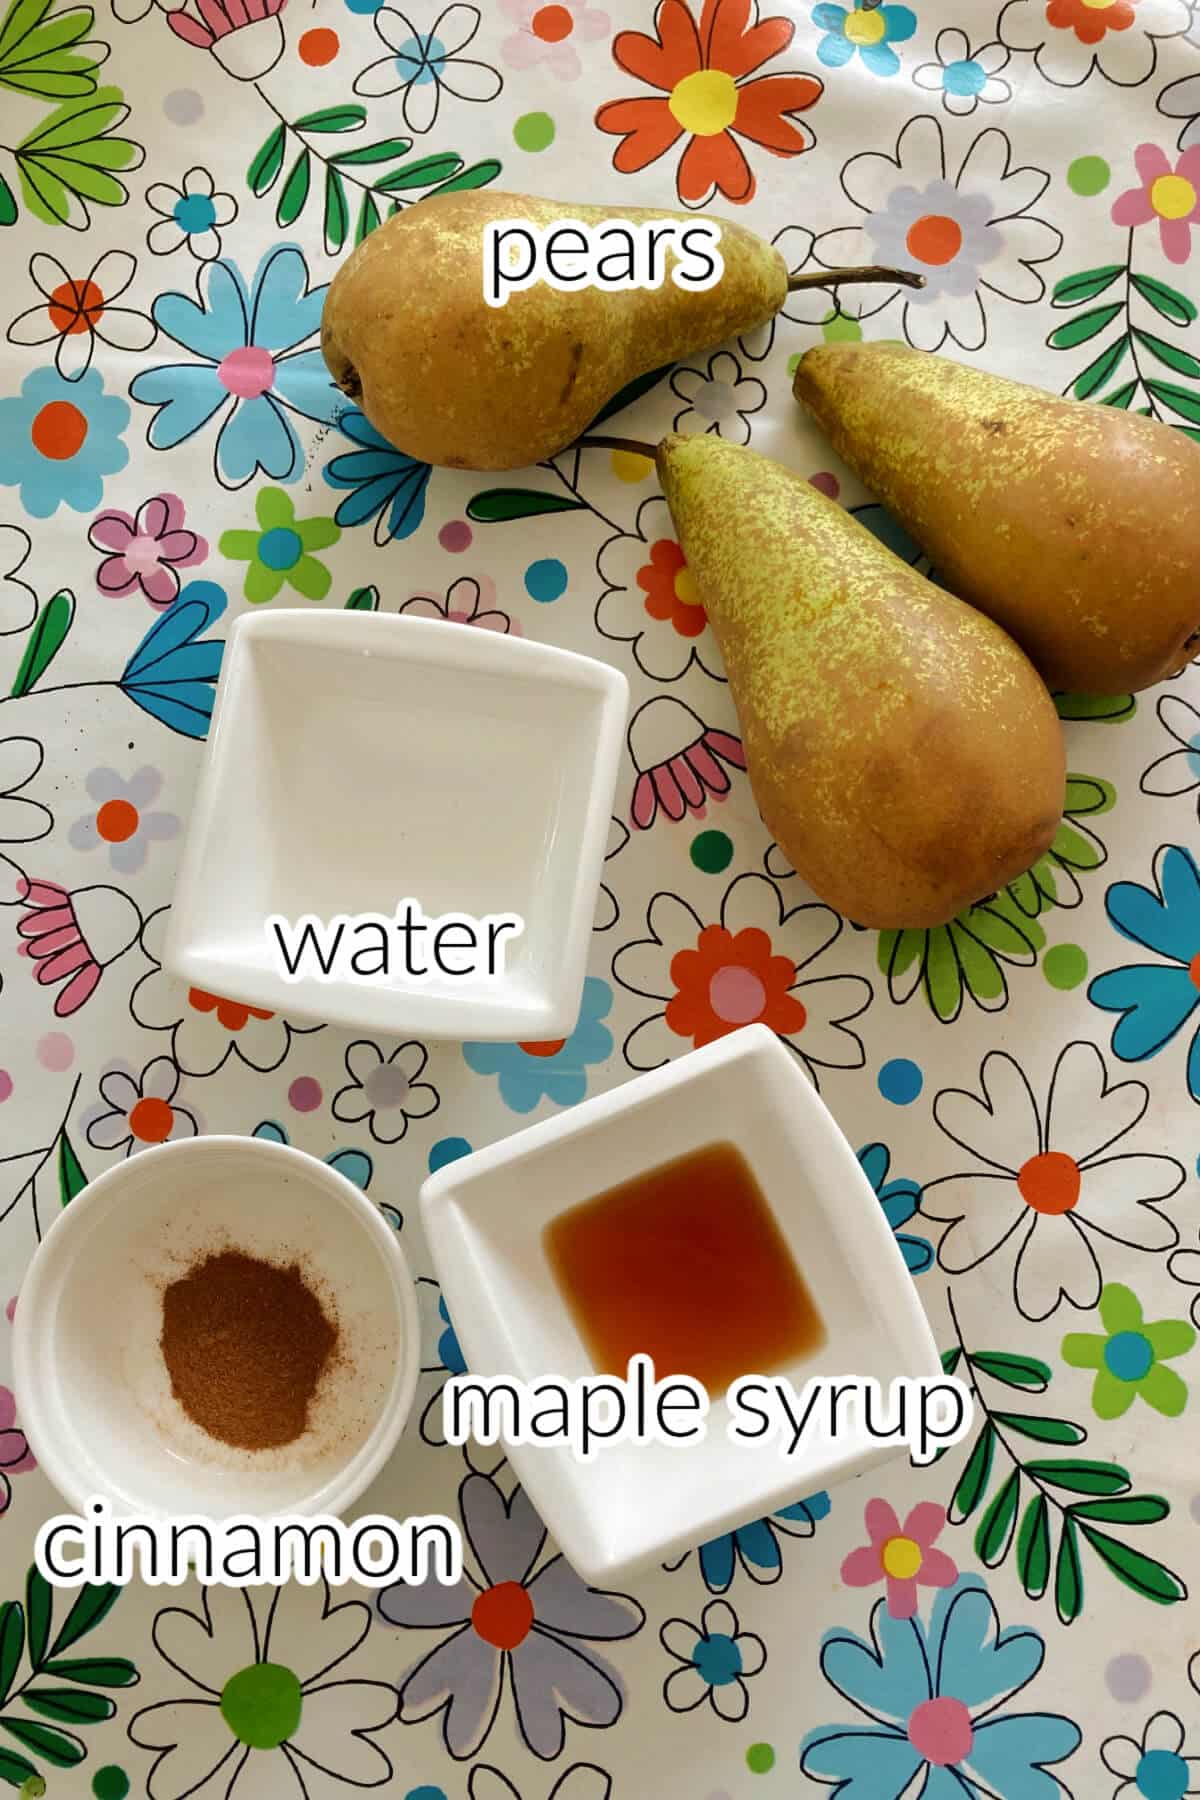 Ingredients needed to make baked pears.